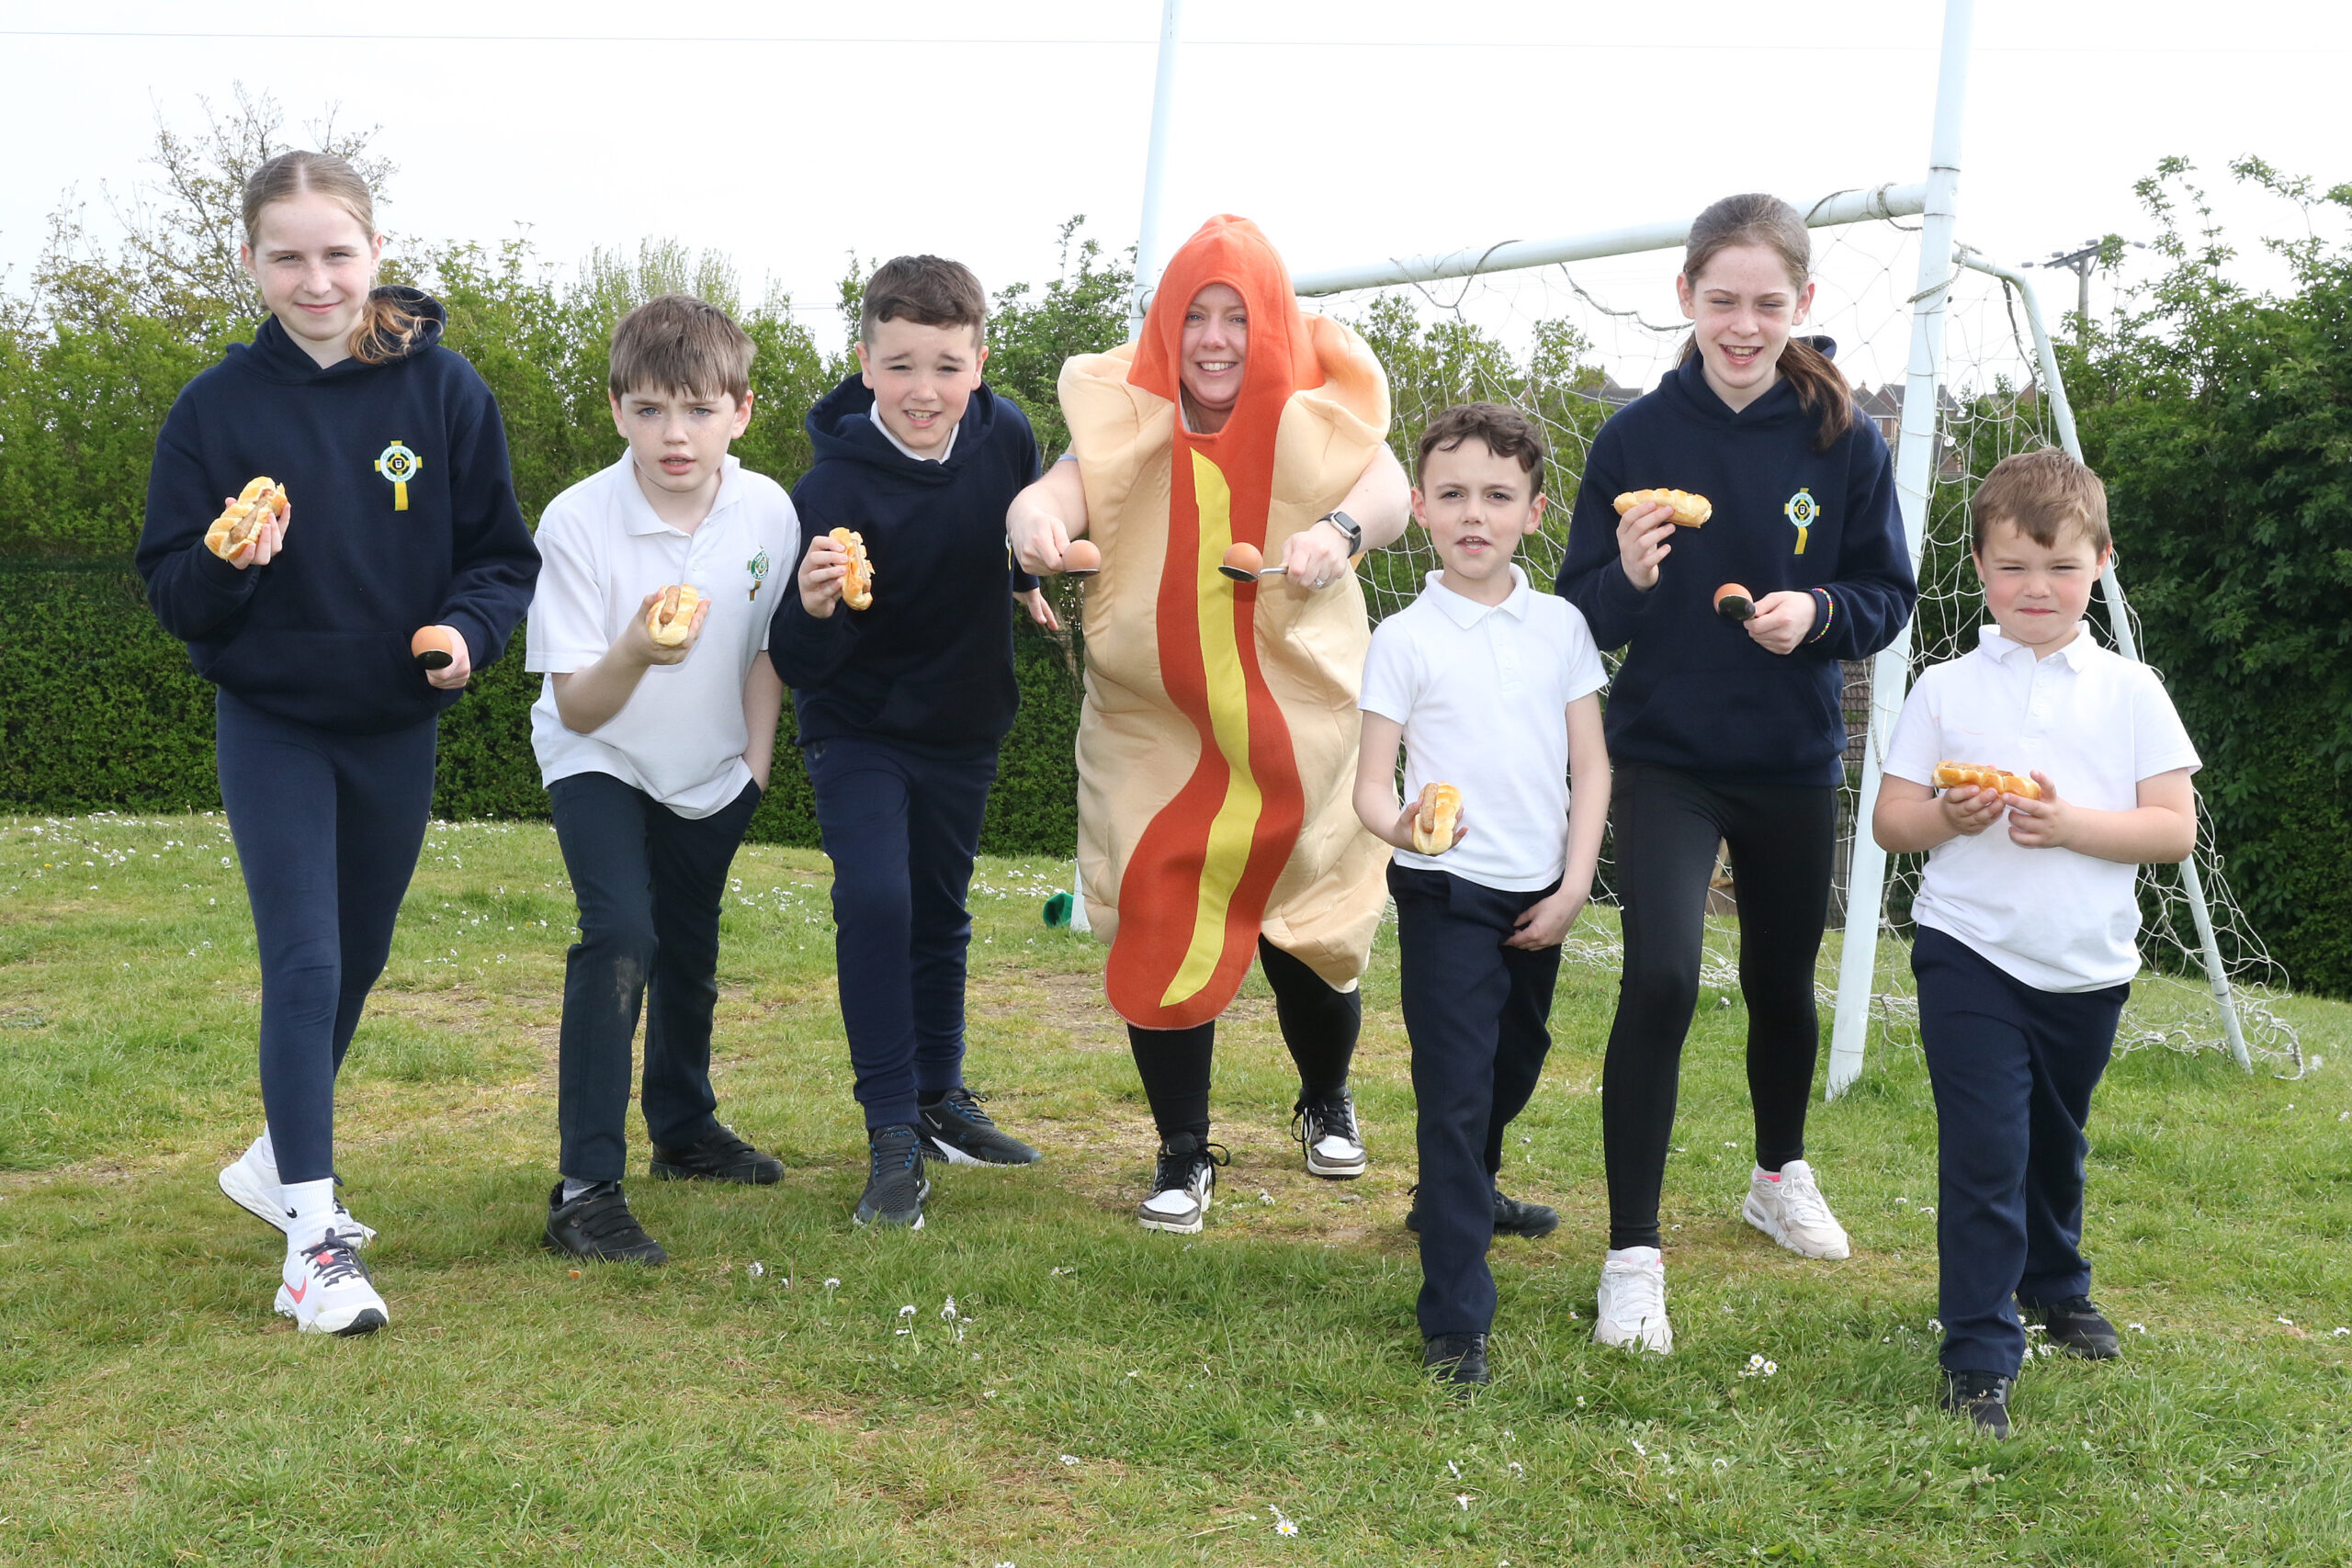 FINNEBROGUE LAUNCHES EXCITING HEALTHY HABITS INITIATIVE FOR SCHOOL SPORTS DAY IN NORTHERN IRELAND